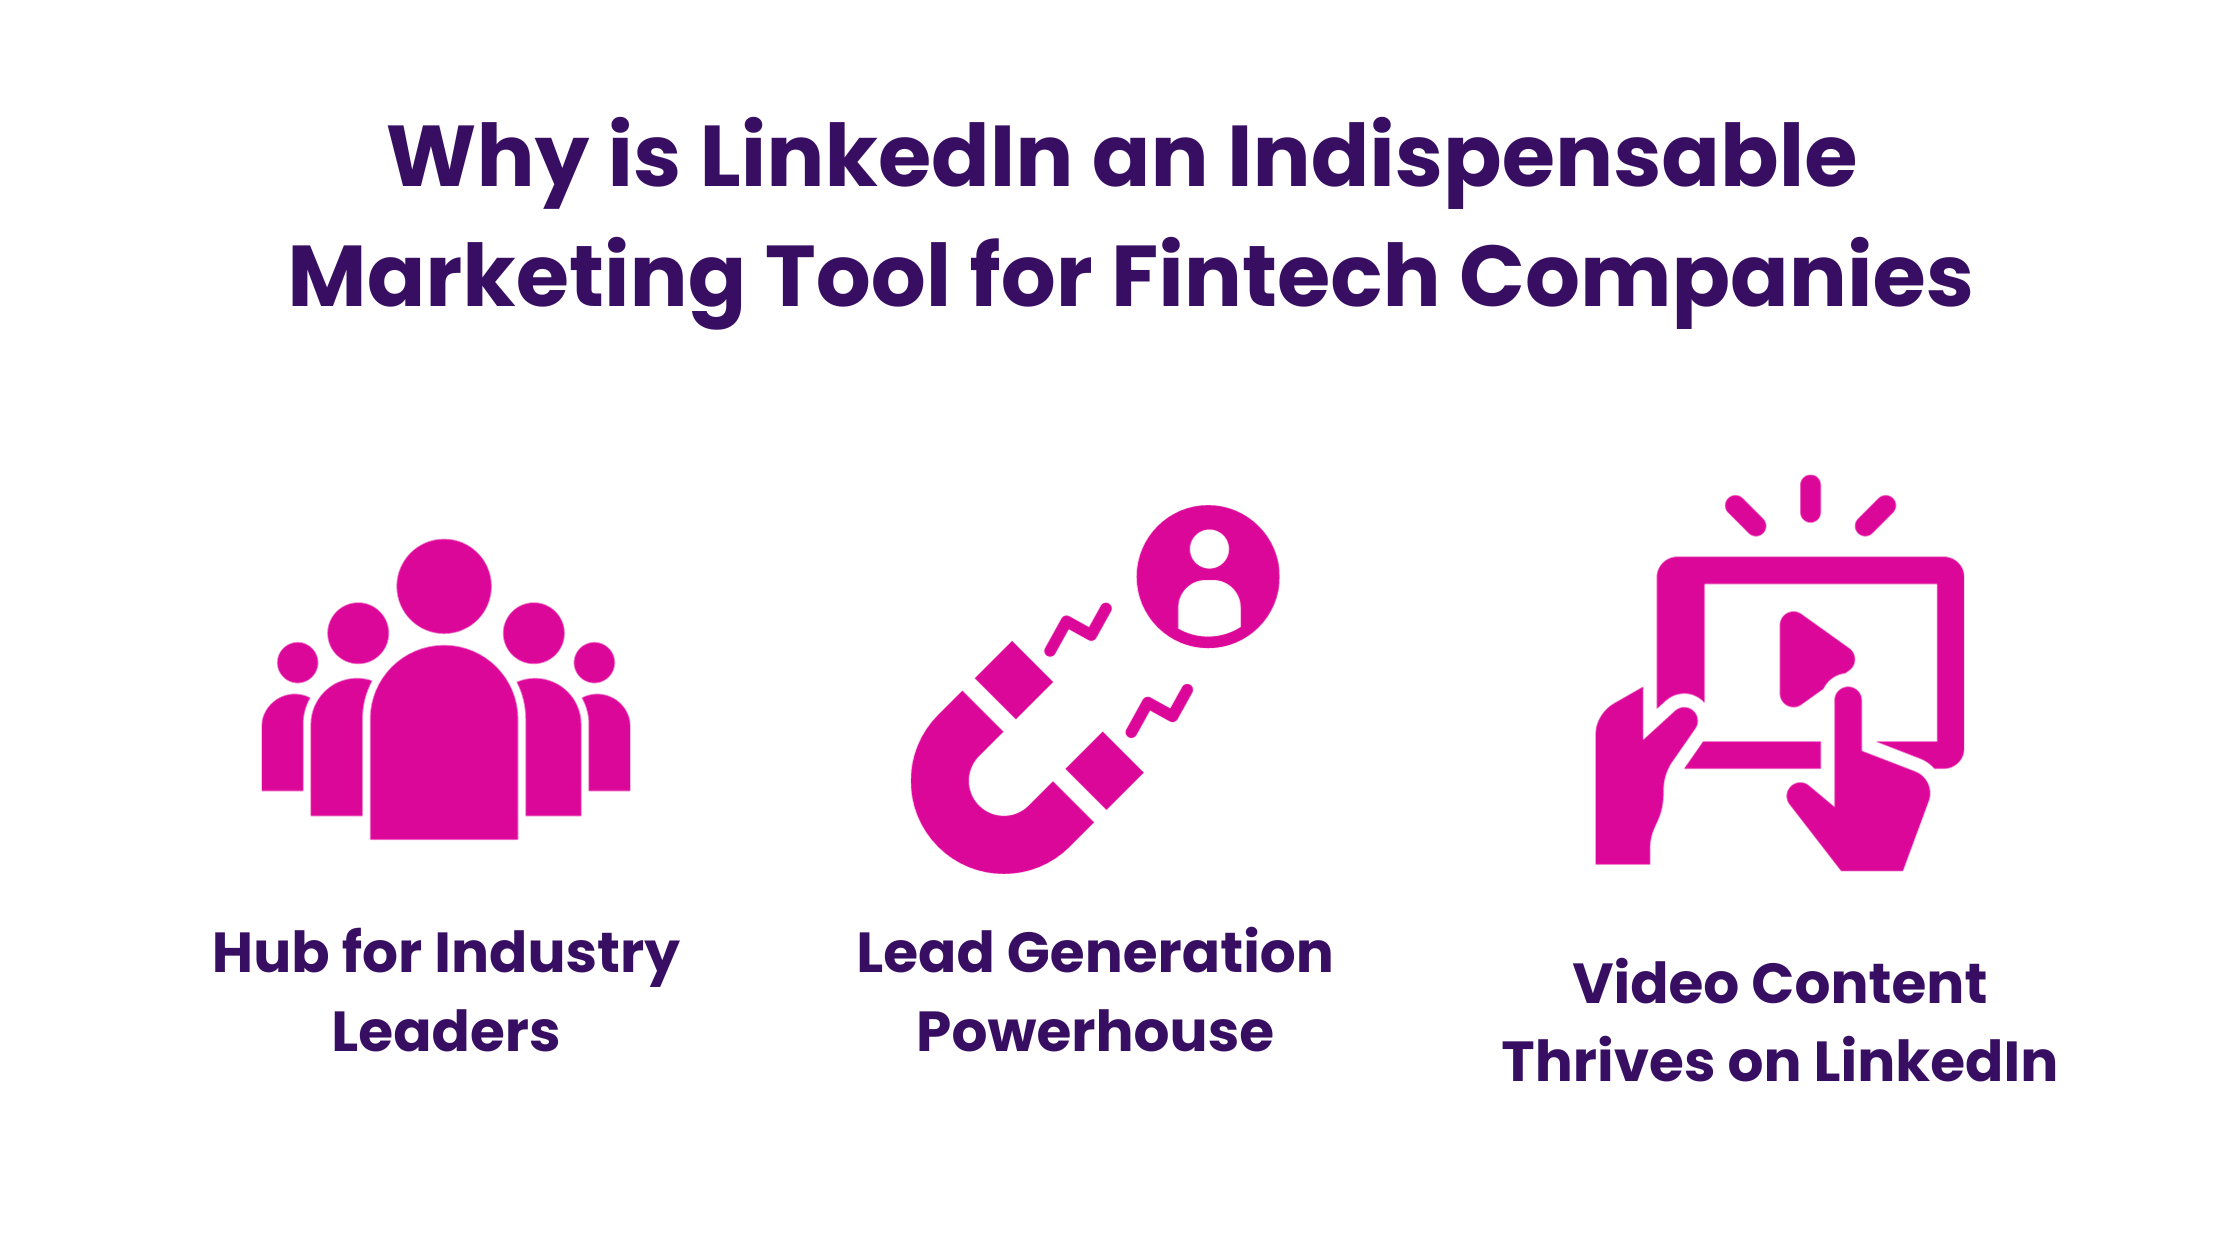 Why is LinkedIn an Indispensable Marketing Tool for Fintech Companies